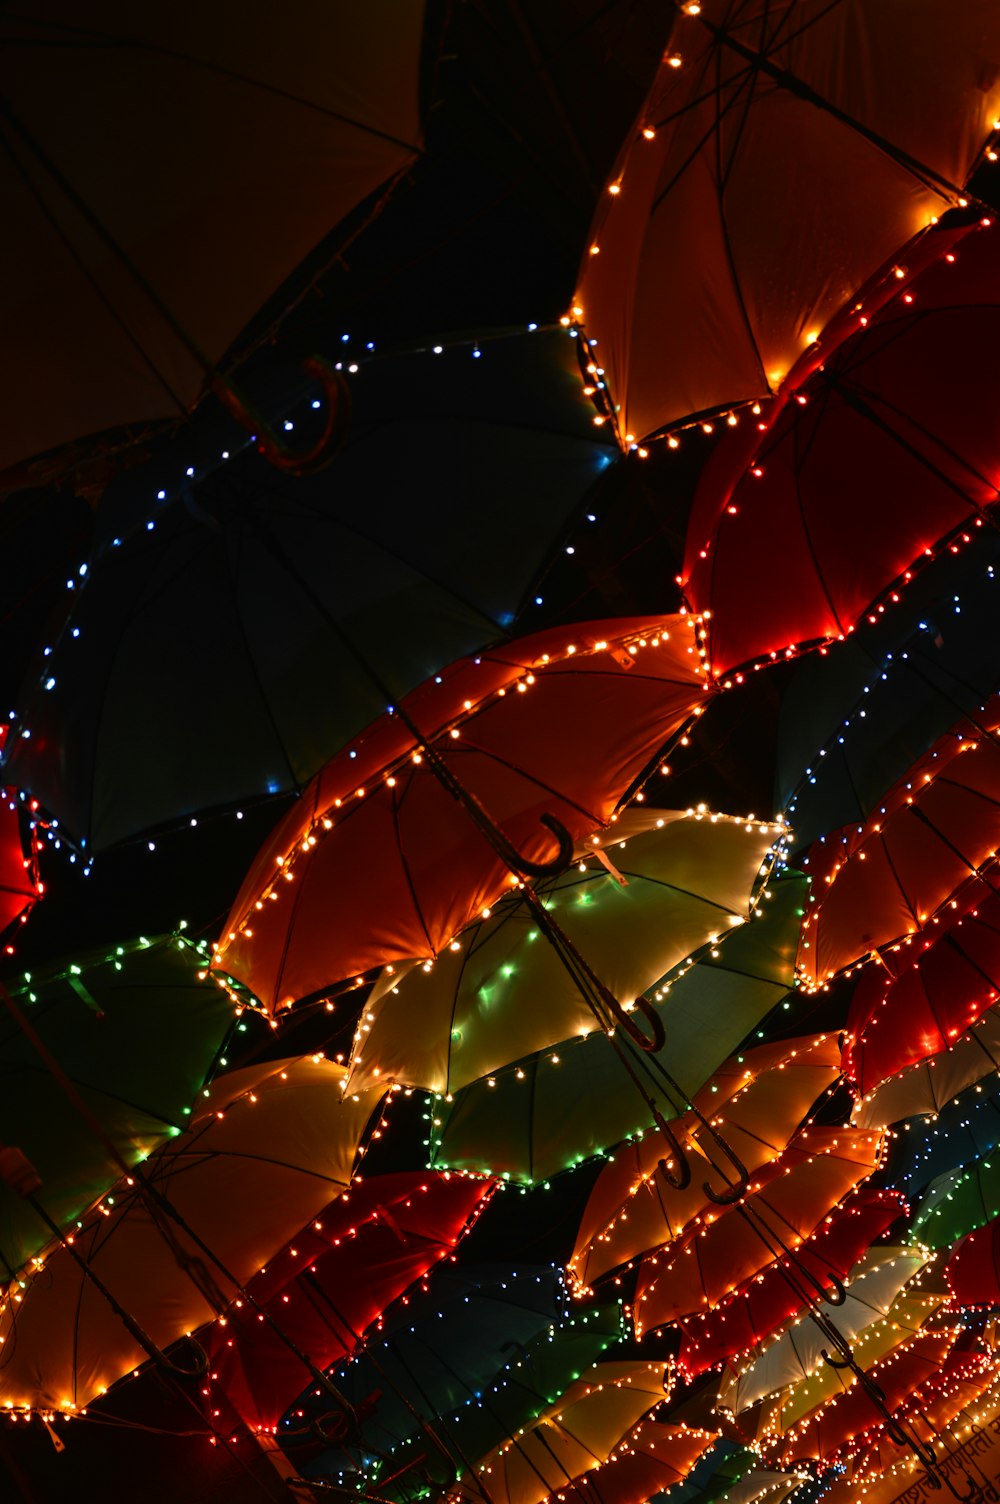 closeup photo of hanged umbrella with lighted string lights